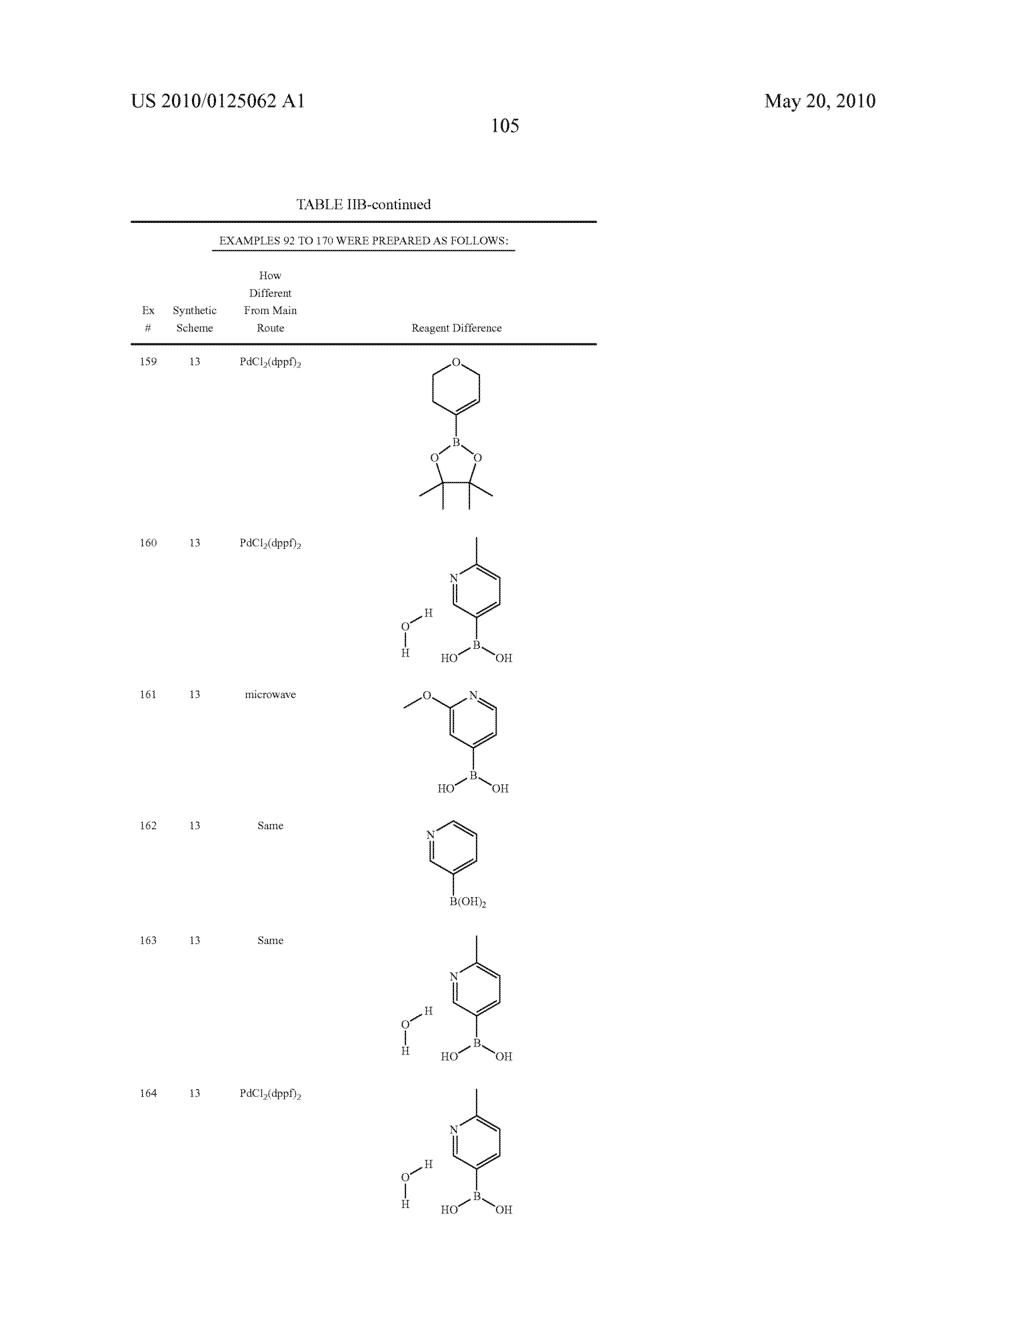 PYRIDINE AND PYRIMIDINE DERIVATIVES AS PHOSPHODIESTERASE 10 INHIBITORS - diagram, schematic, and image 106